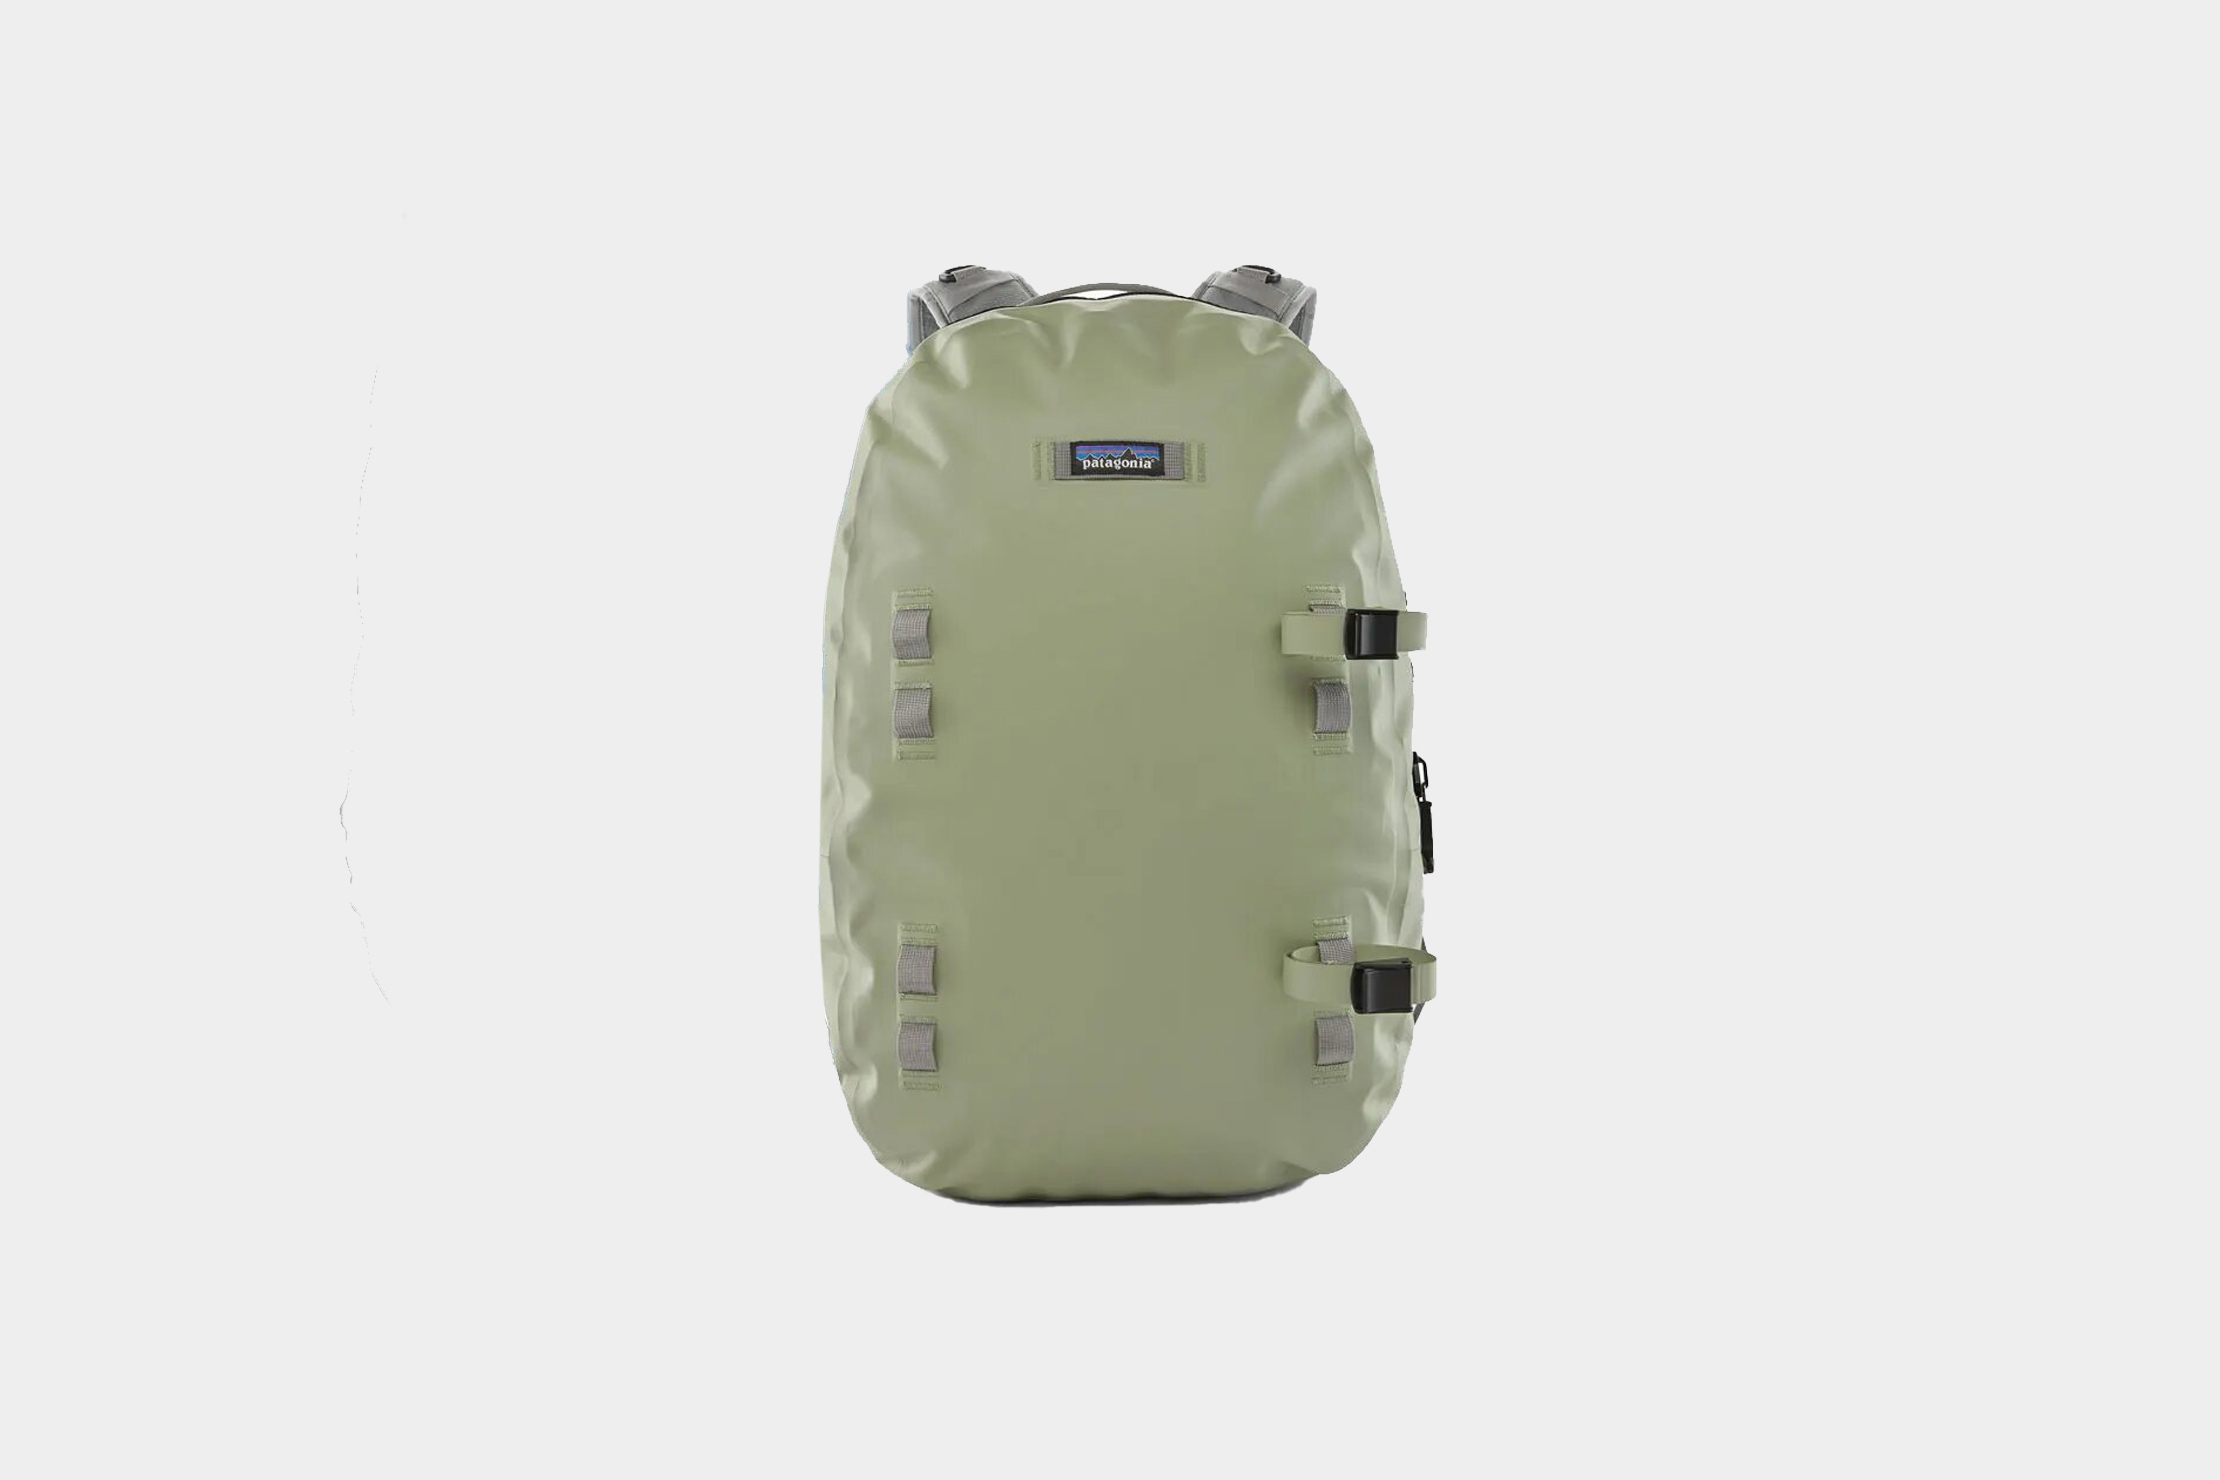 Patagonia Guidewater Backpack 29L Review